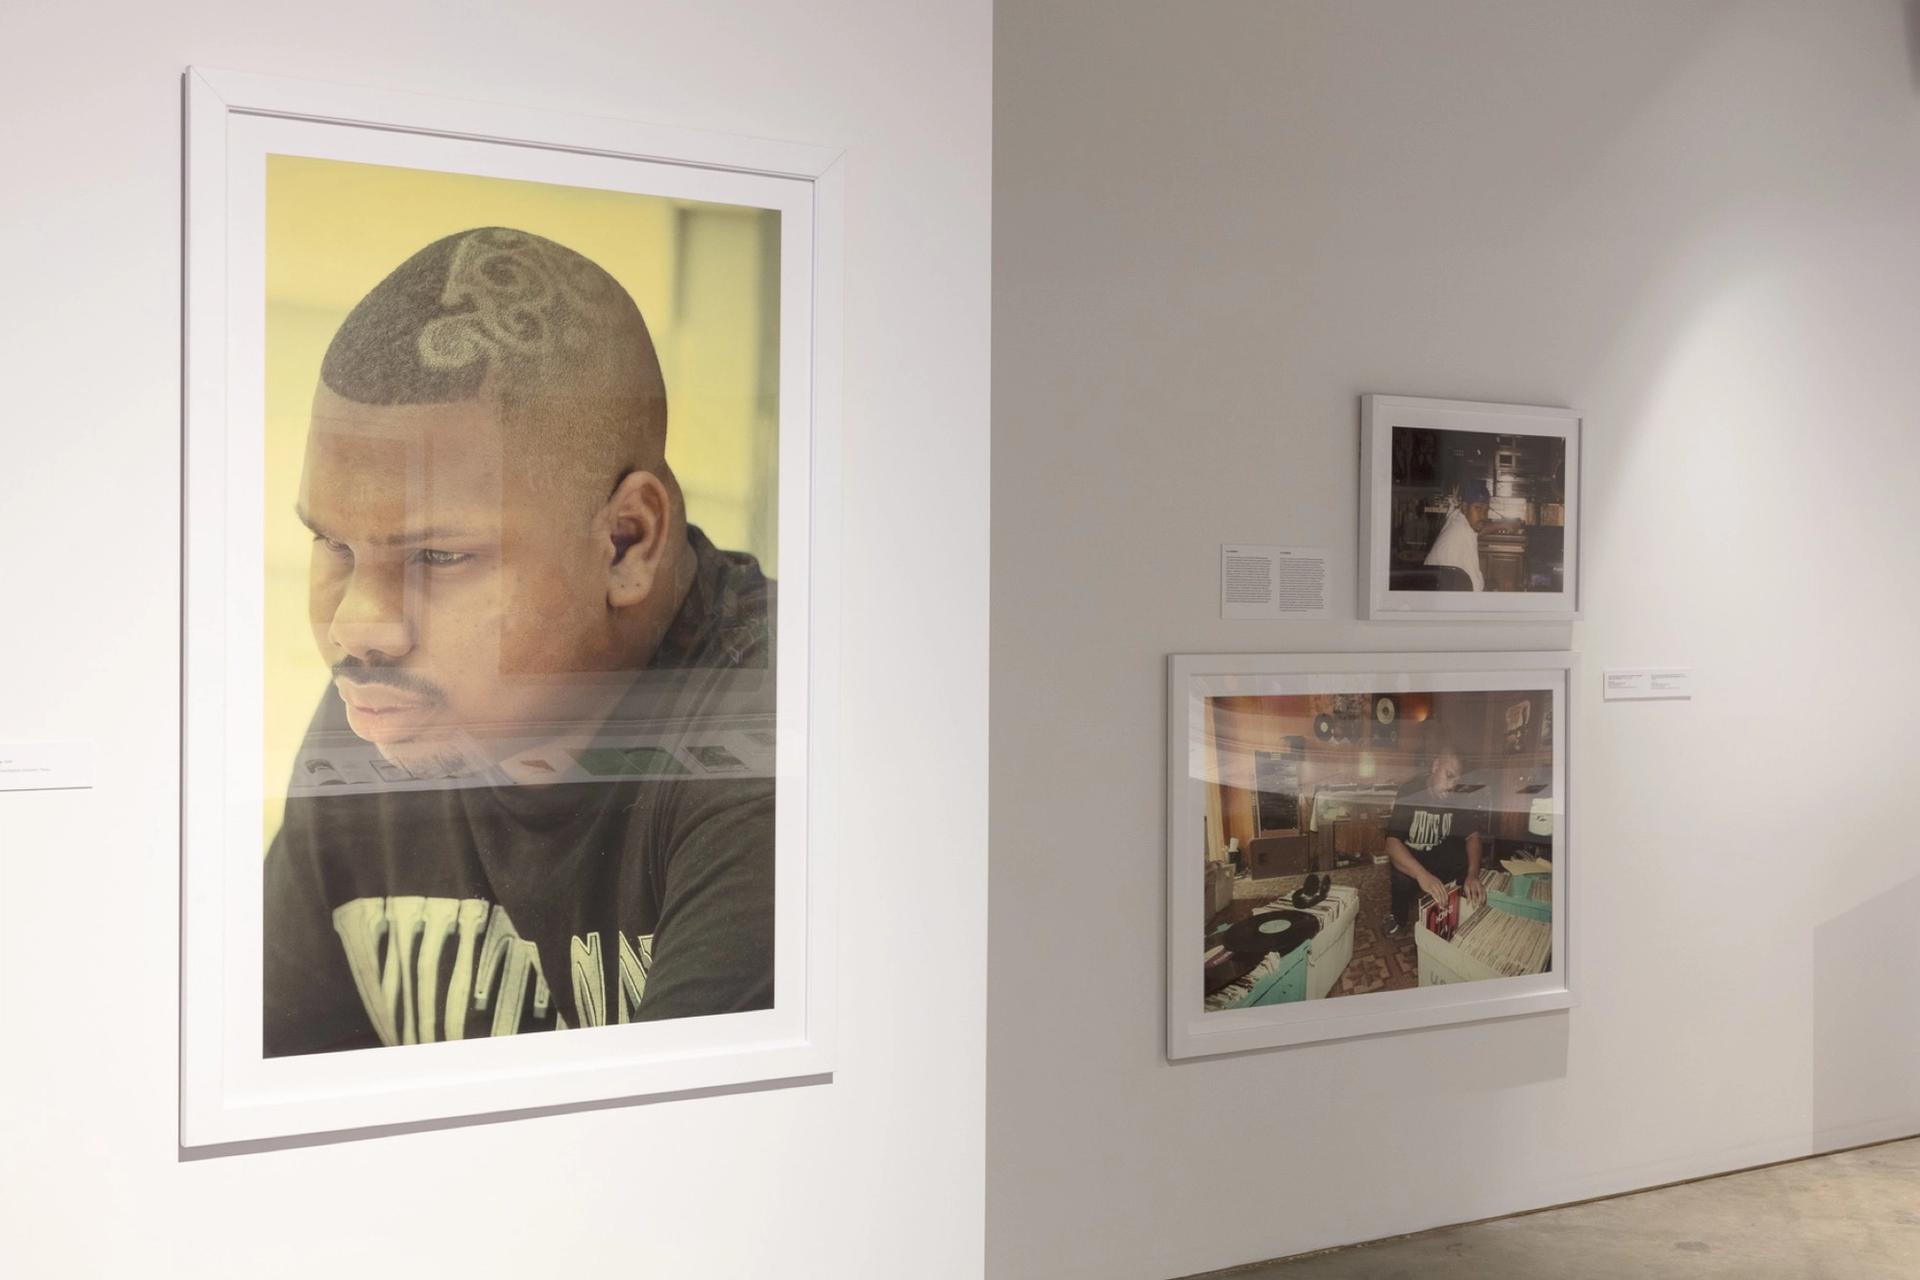 Photo by Ben De Soto, 1995, in "Slowed and Throwed: Records of the City through Mutated Lenses," installation view. Photo: Emily Peacock, 2020; courtesy of the Contemporary Art Museum of Houston (CAMH)